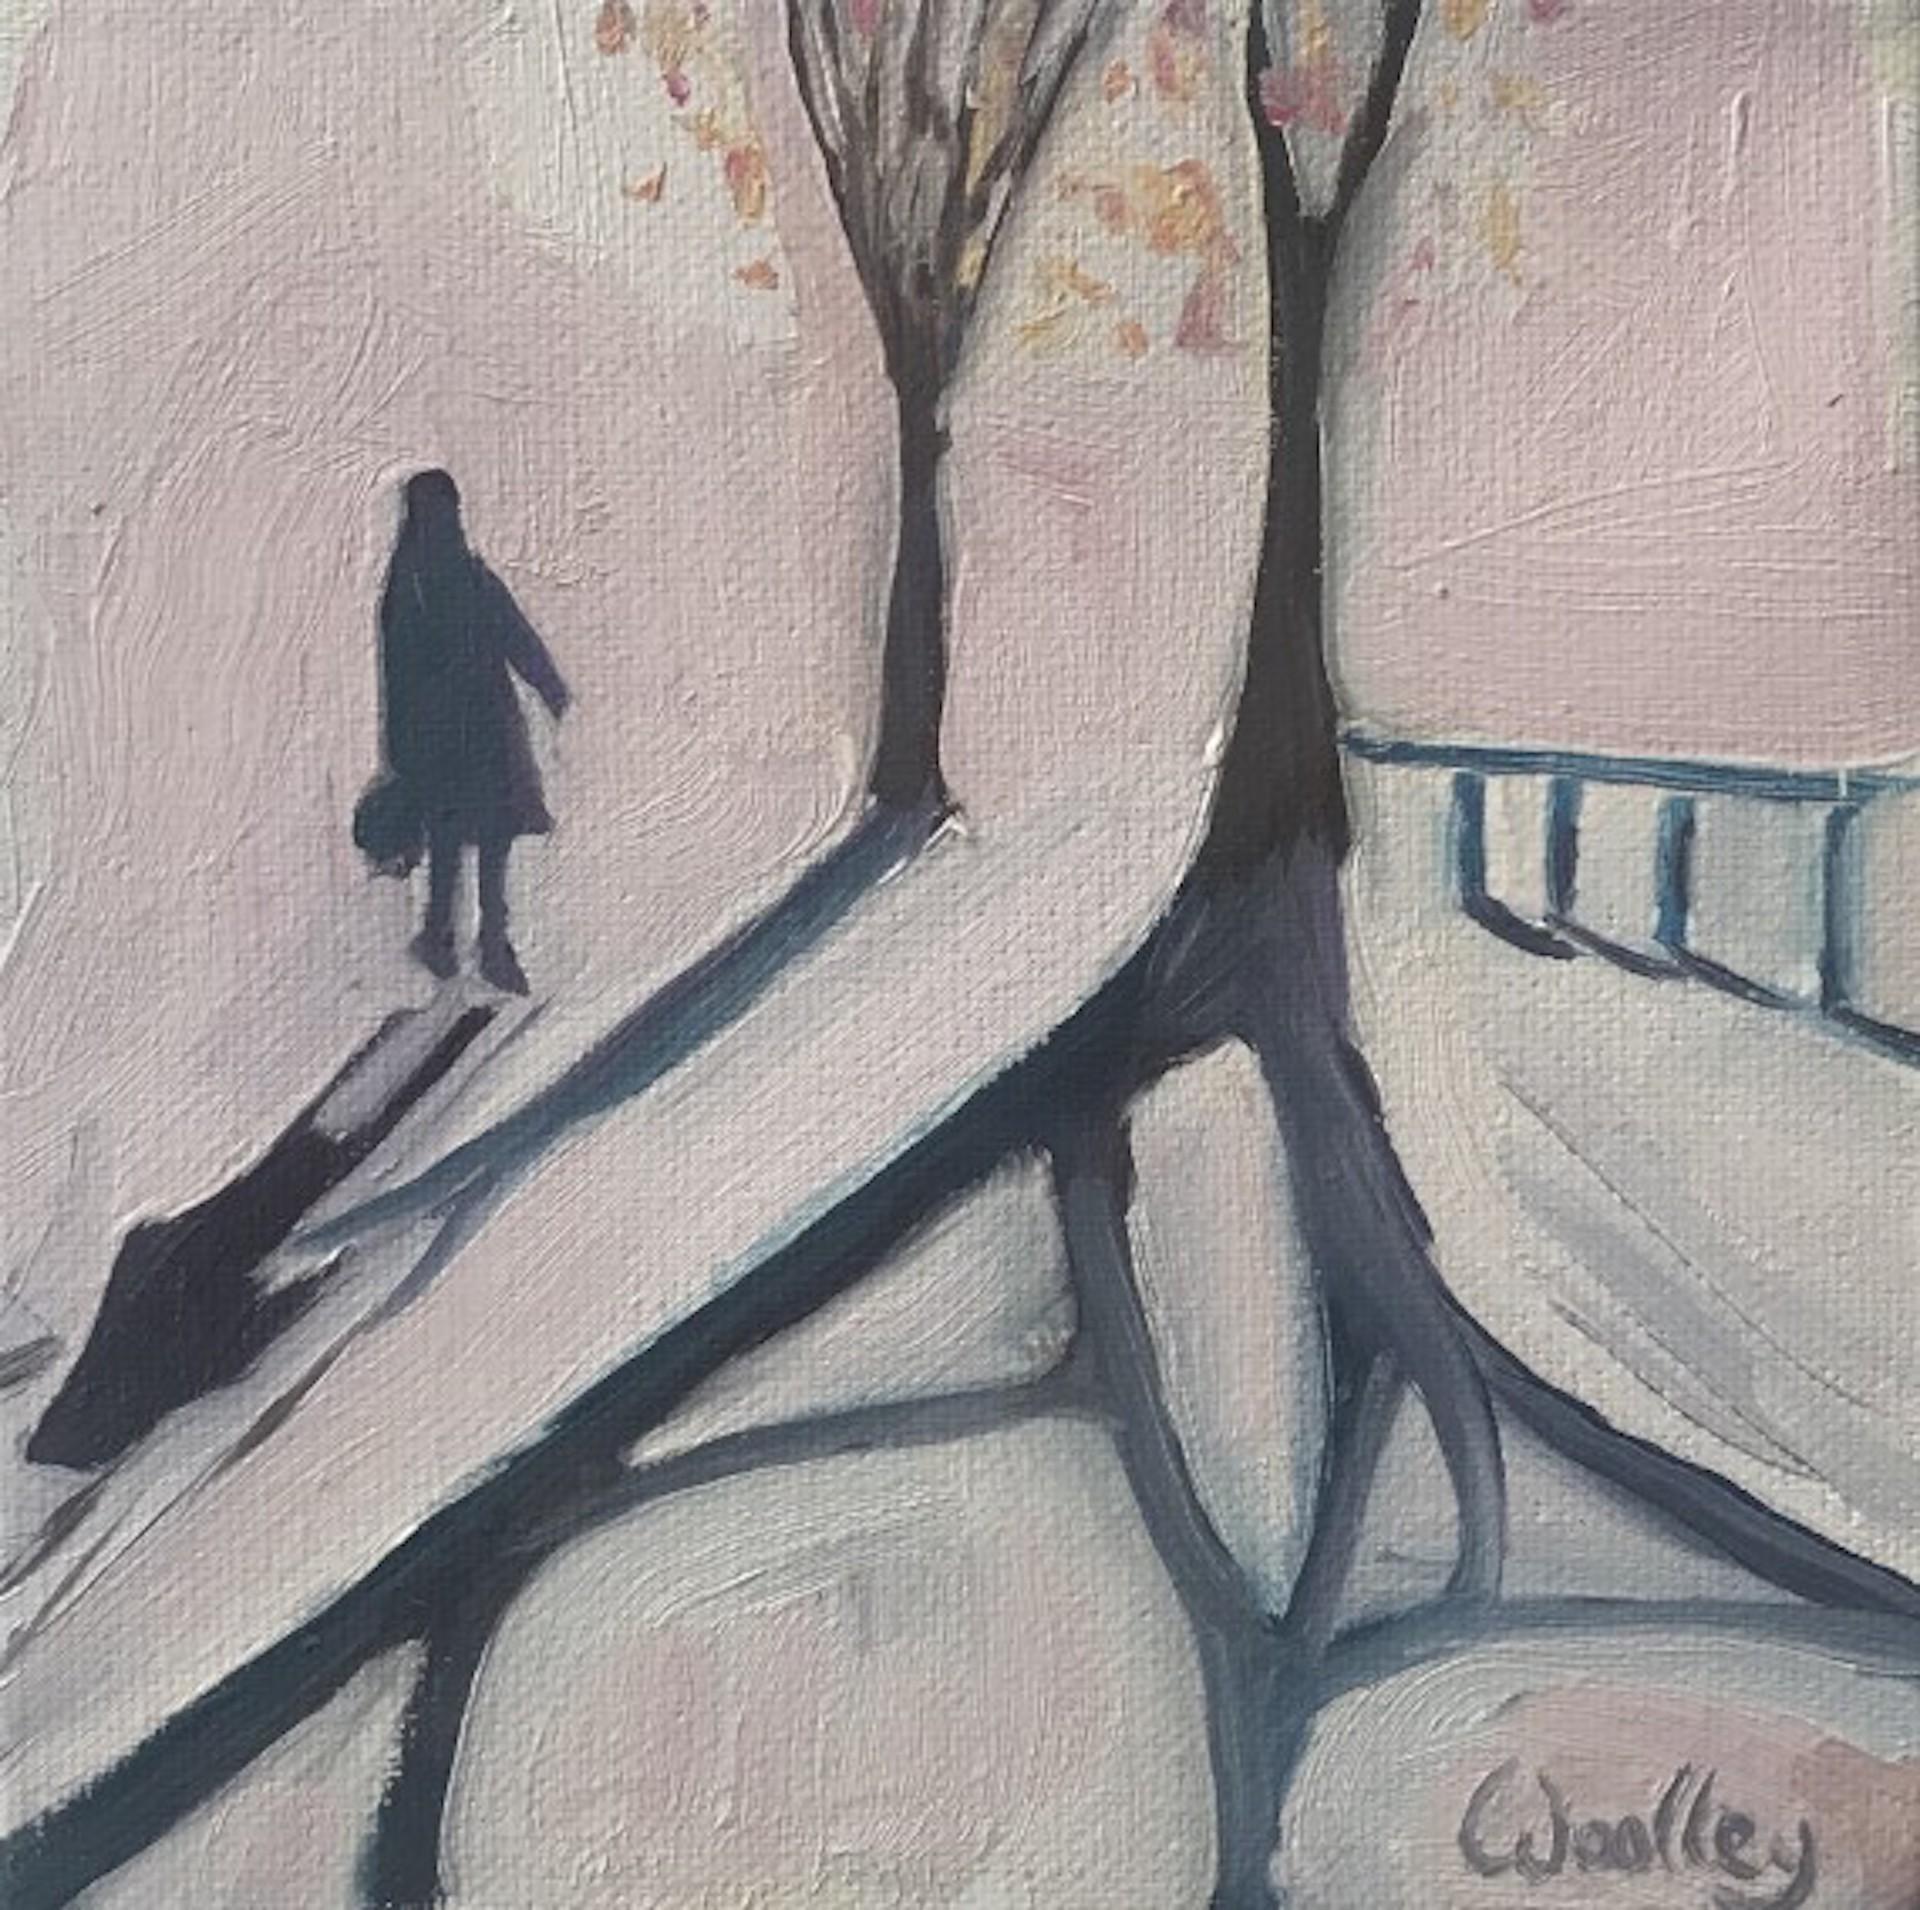 Eleanor Woolley
Original Painting
Oil Paint on Canvas
Size: H:15 cm x W:15 cm x D:4cm
Sold Unframed
Please note that insitu images are purely an indication of how a piece may look

Winter shadows 16 is an original figurative painting by Eleanor